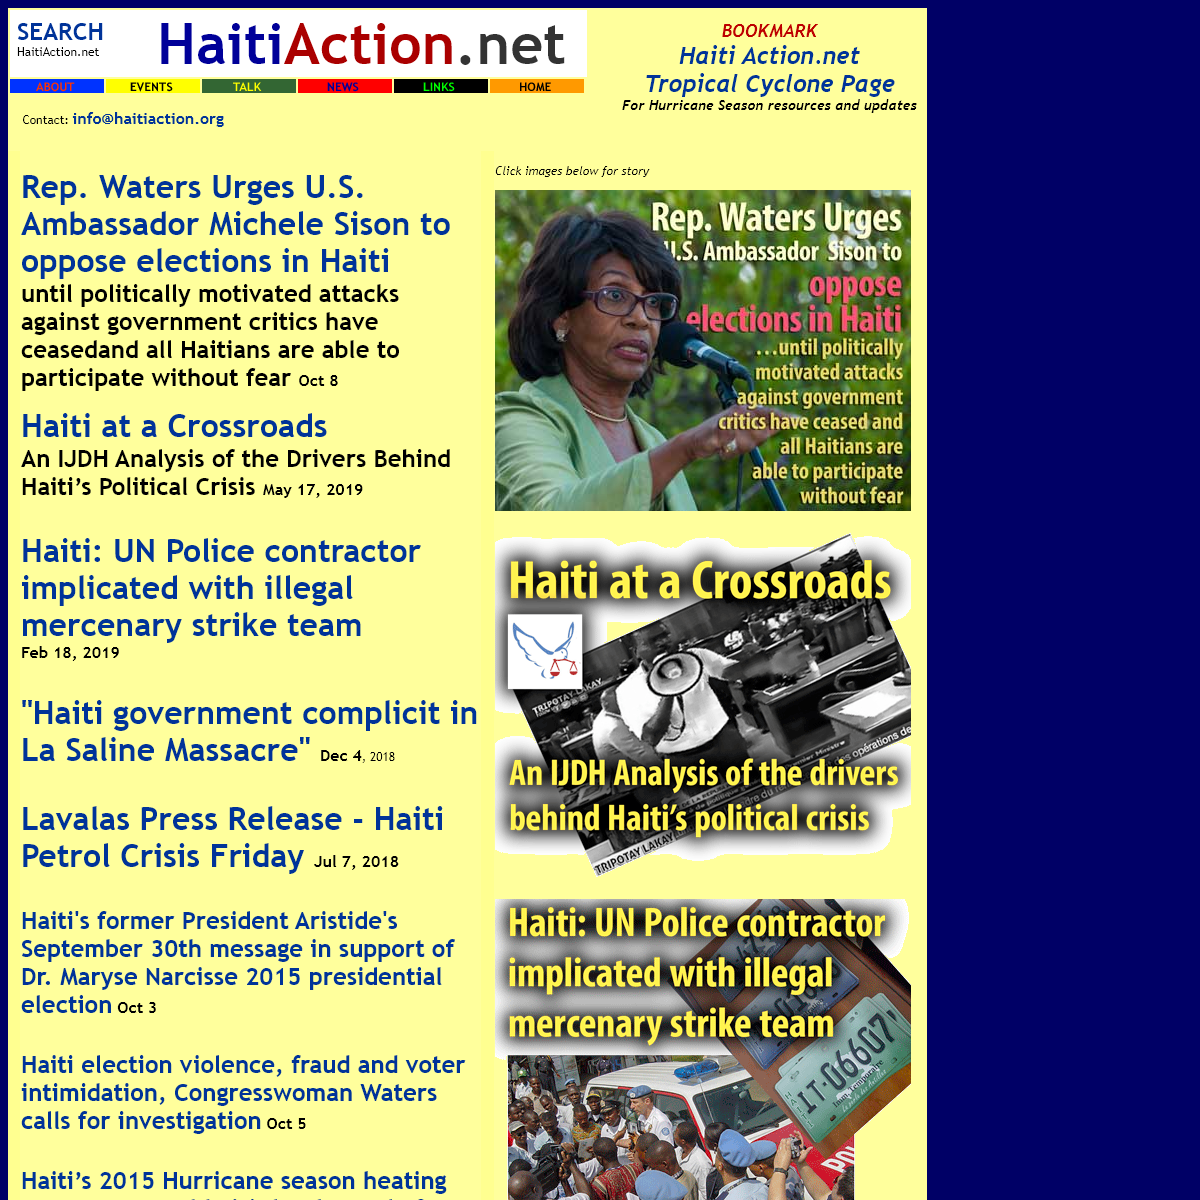 A complete backup of haitiaction.net